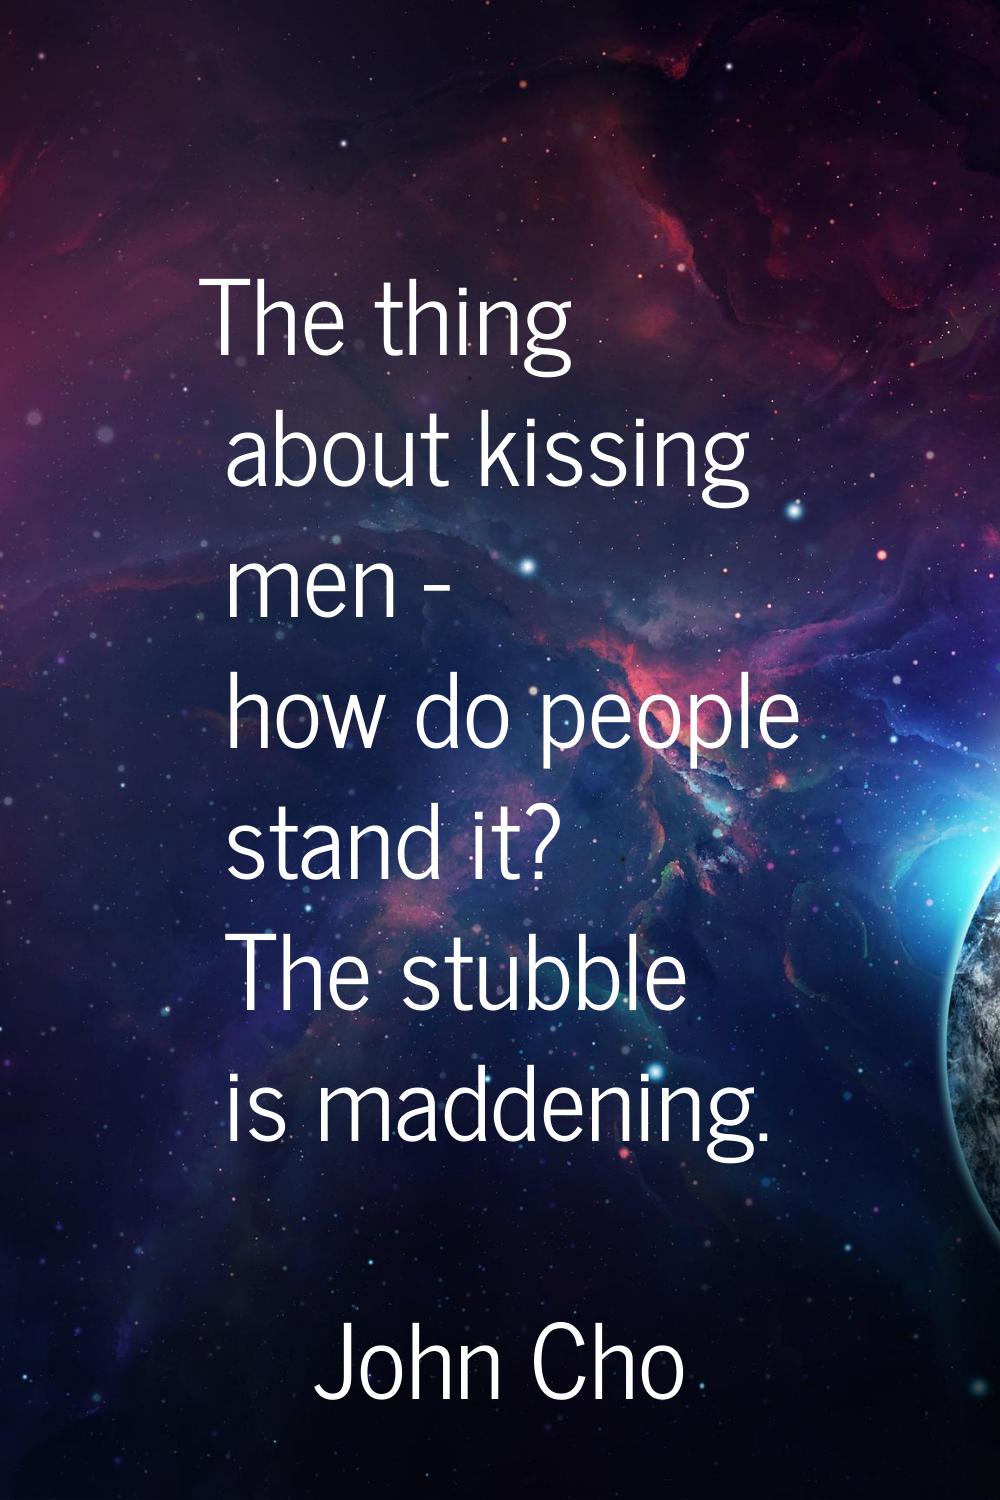 The thing about kissing men - how do people stand it? The stubble is maddening.